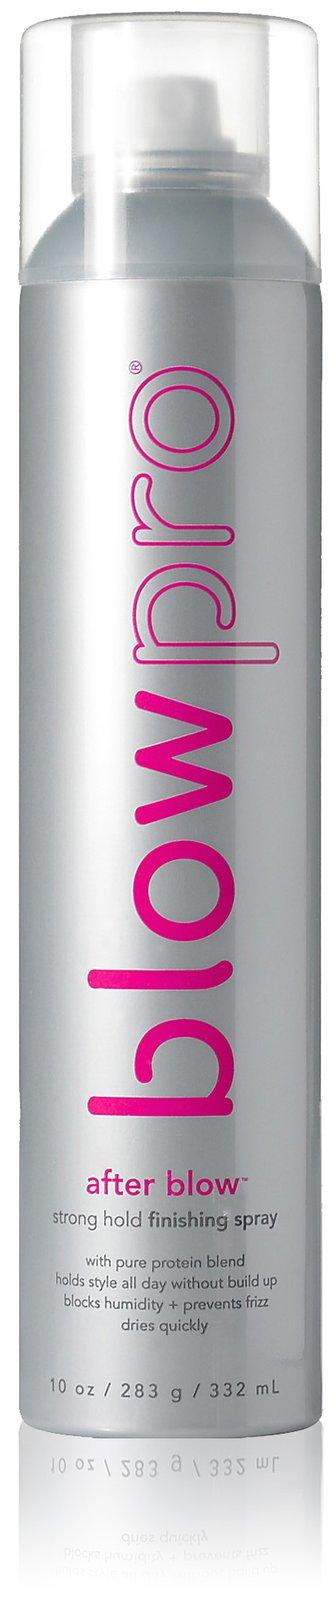 Blow Pro After Blow Strong Hold Finishing Spray - 10 Oz